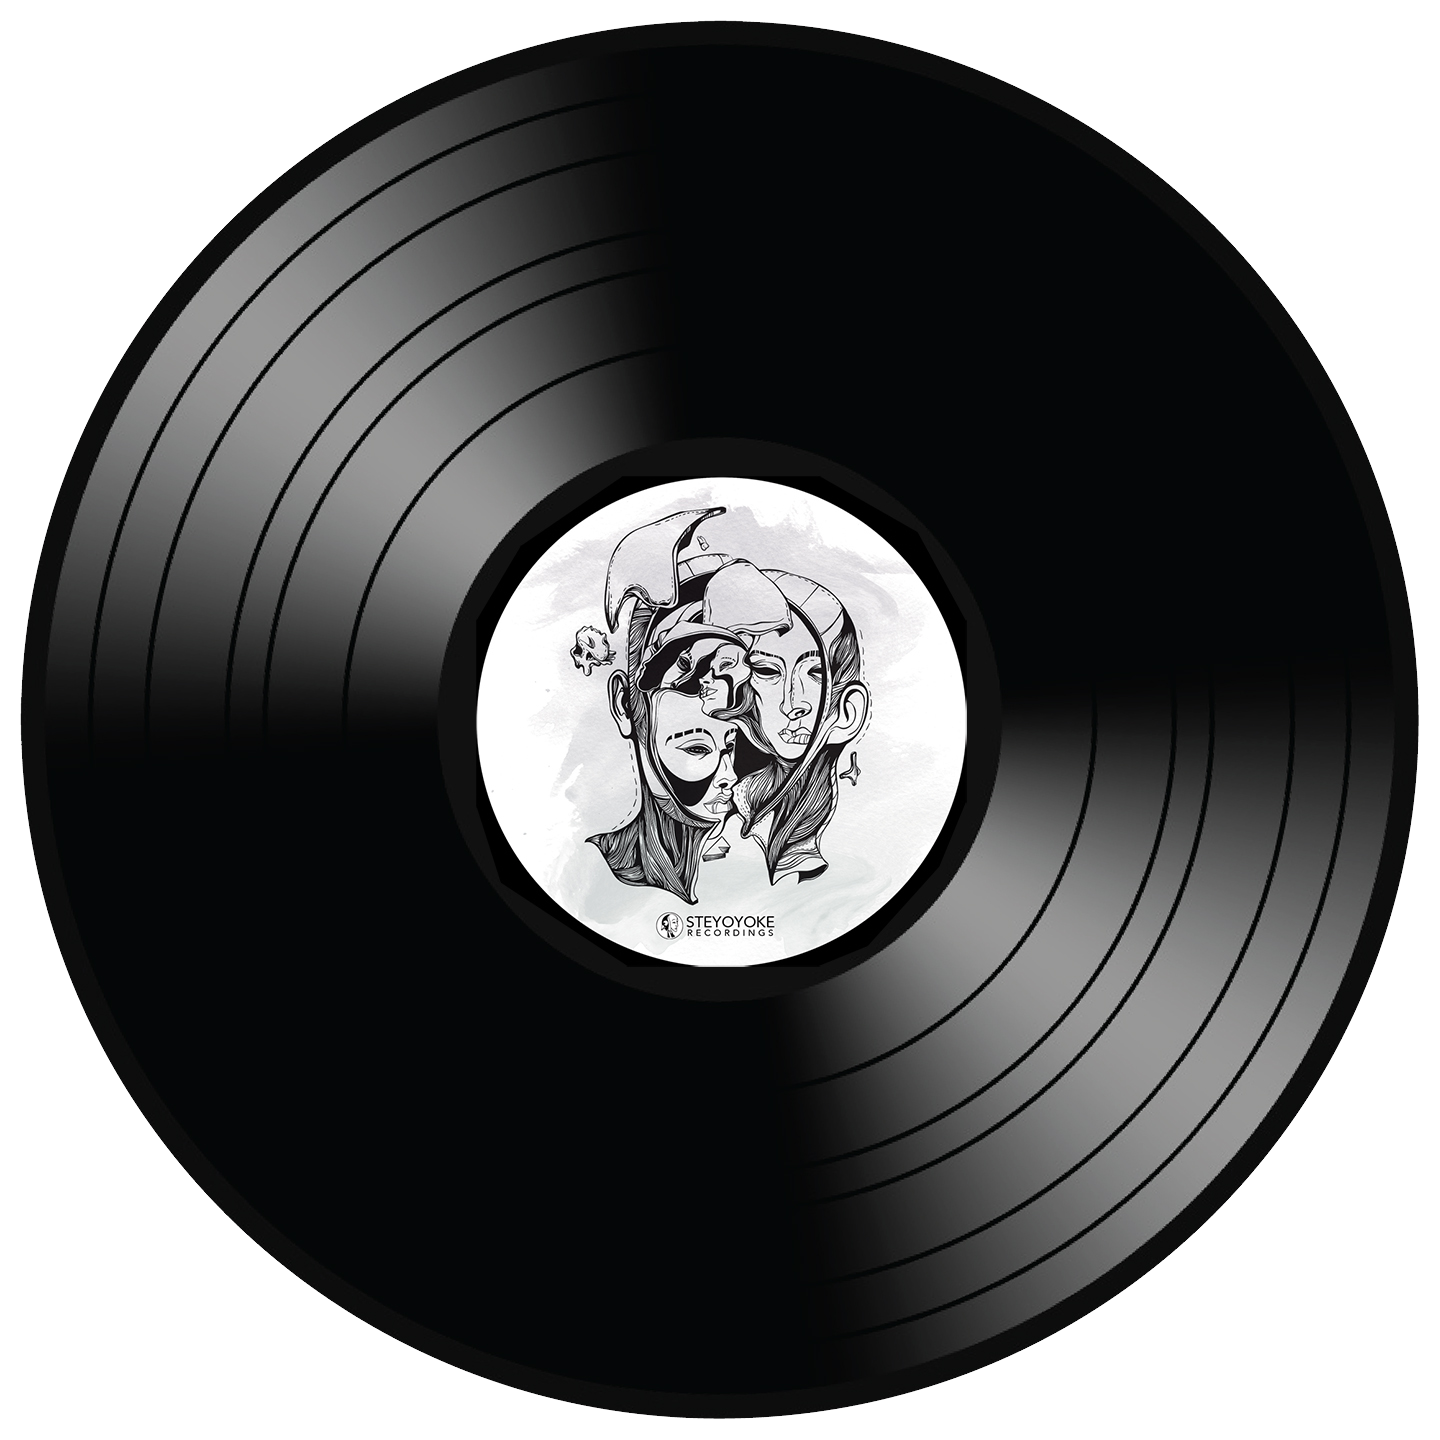 Vinyl Record PNG Free File Download